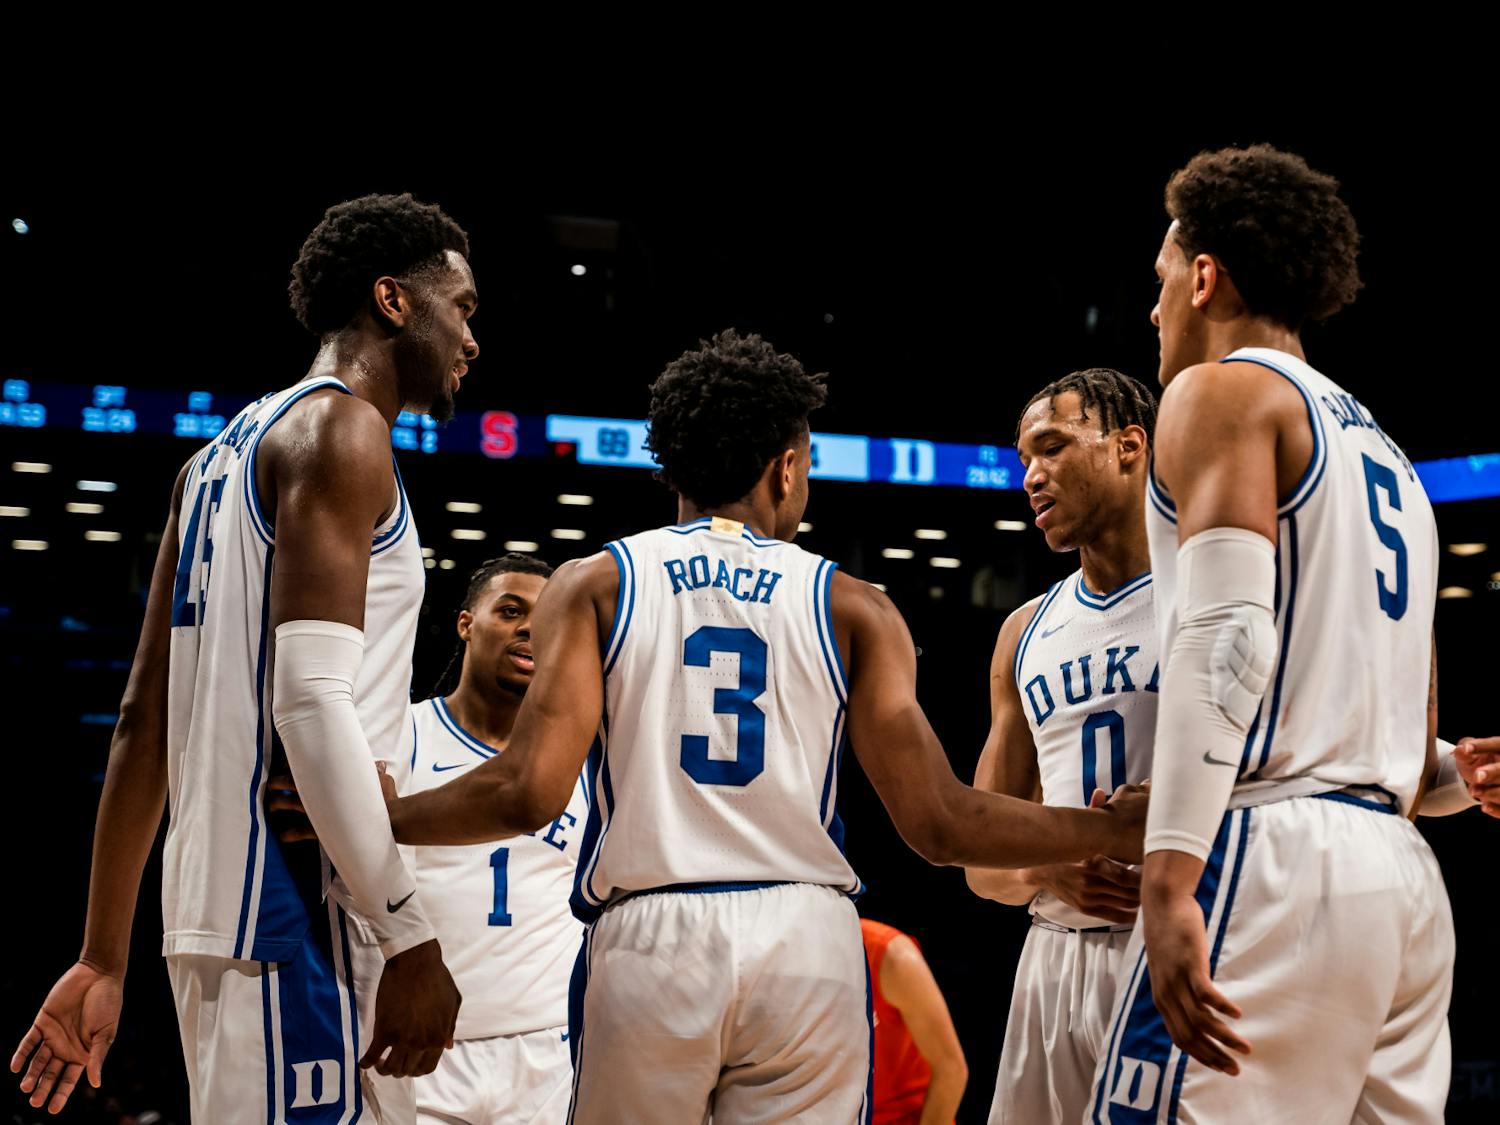 The Blue Devils escaped an early exit via the Syracuse Orange. After a neck and neck match for the majority of the game, Duke pulled away at the end of the fourth quarter, finishing the game 88-79.